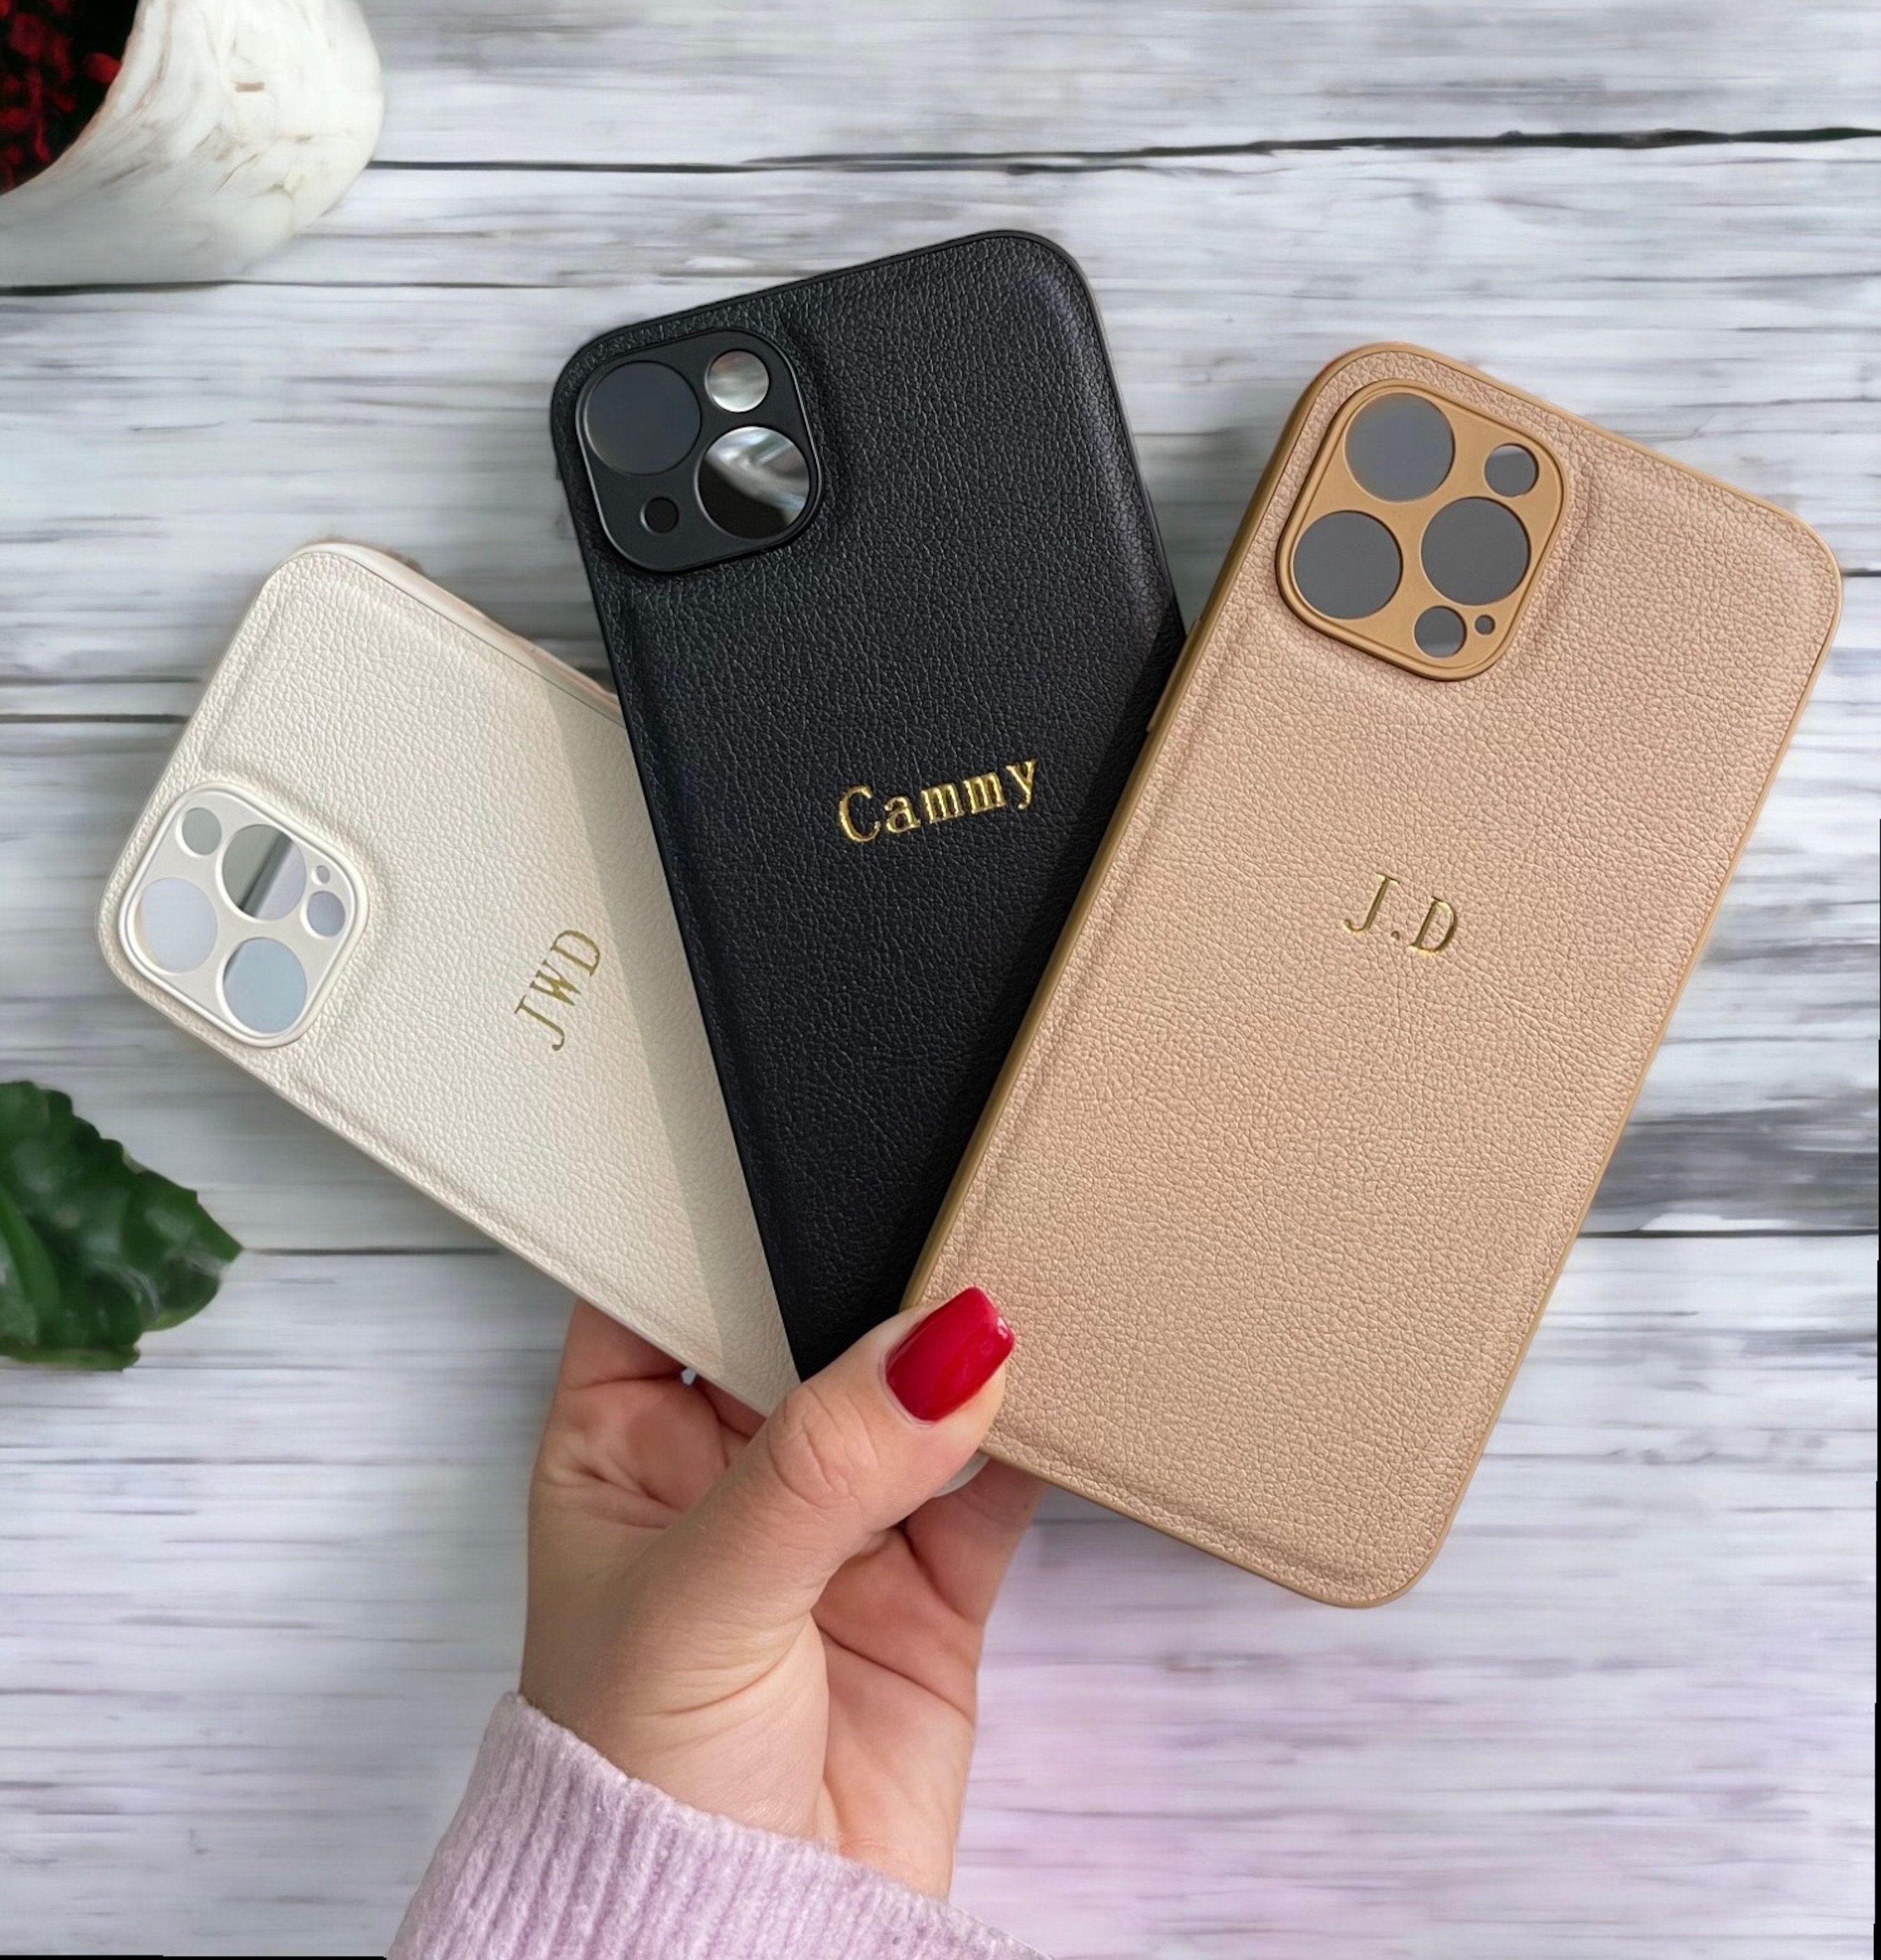 Iphone 11 Case Discover high quality leather wallet case For iPhone 11/ iPhone 11 Pro/ iPhone 11 Pro Max (Nee…